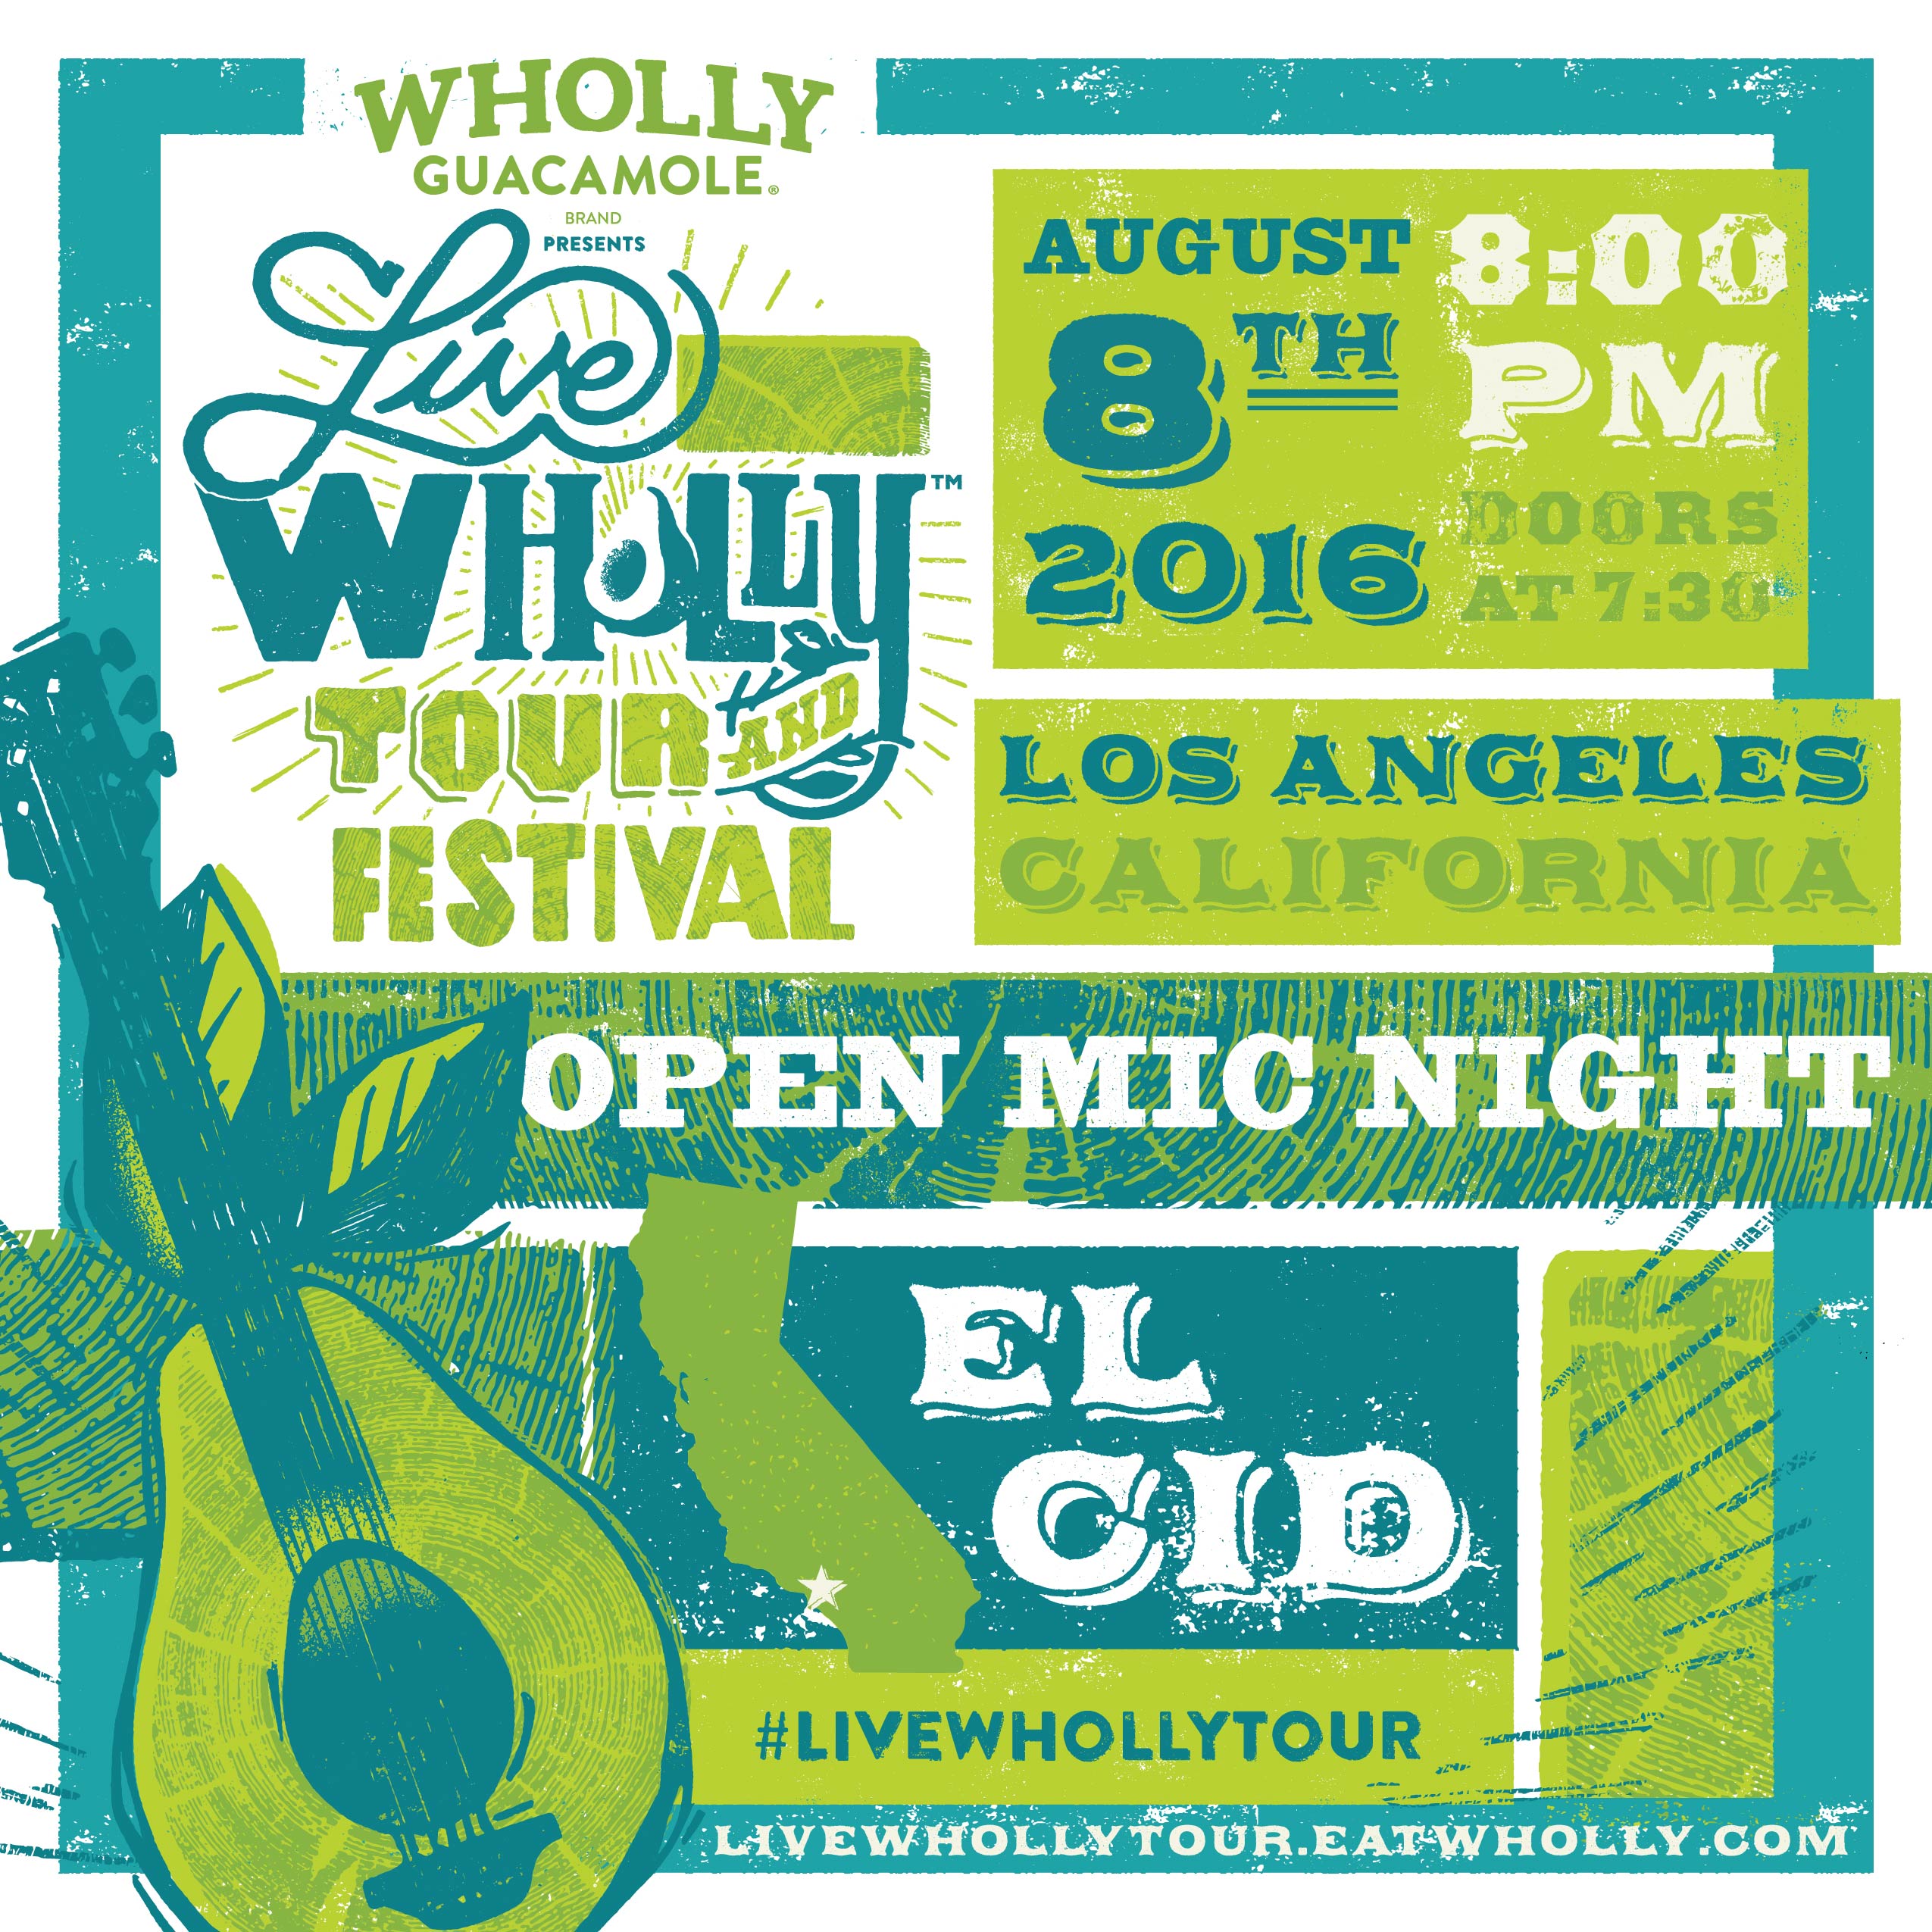 Wholly Guacamole Open Mic Talent Search